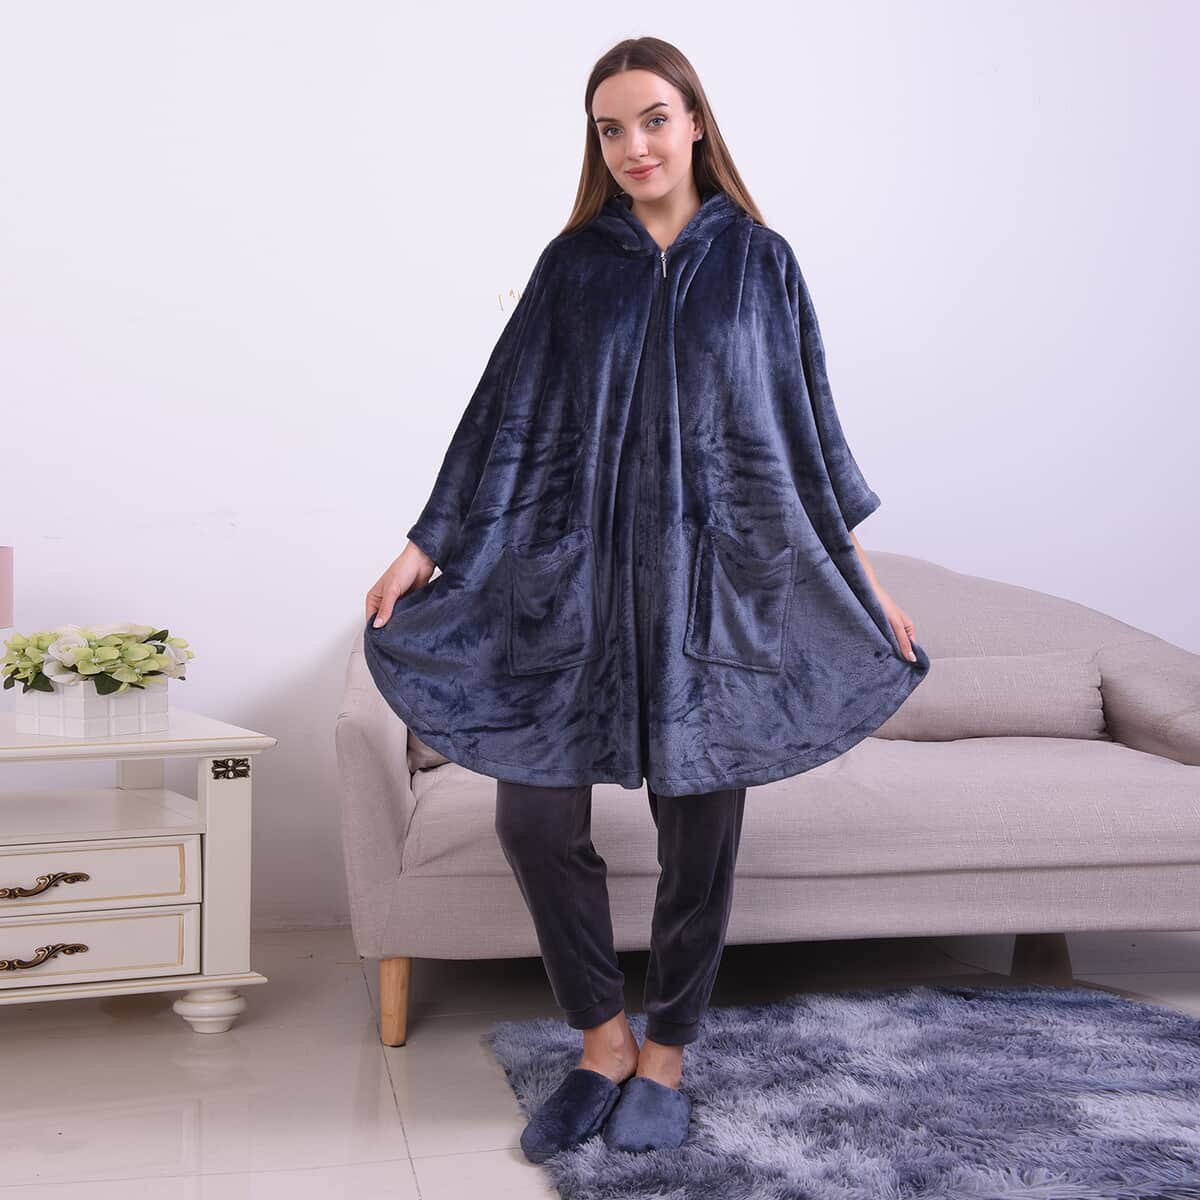 HOMESMART Pewter 100% Polyester Flannel Hooded Moon Shape Robe with Zipper (One Size) and Matching Anti Slip Rubber Slippers image number 0